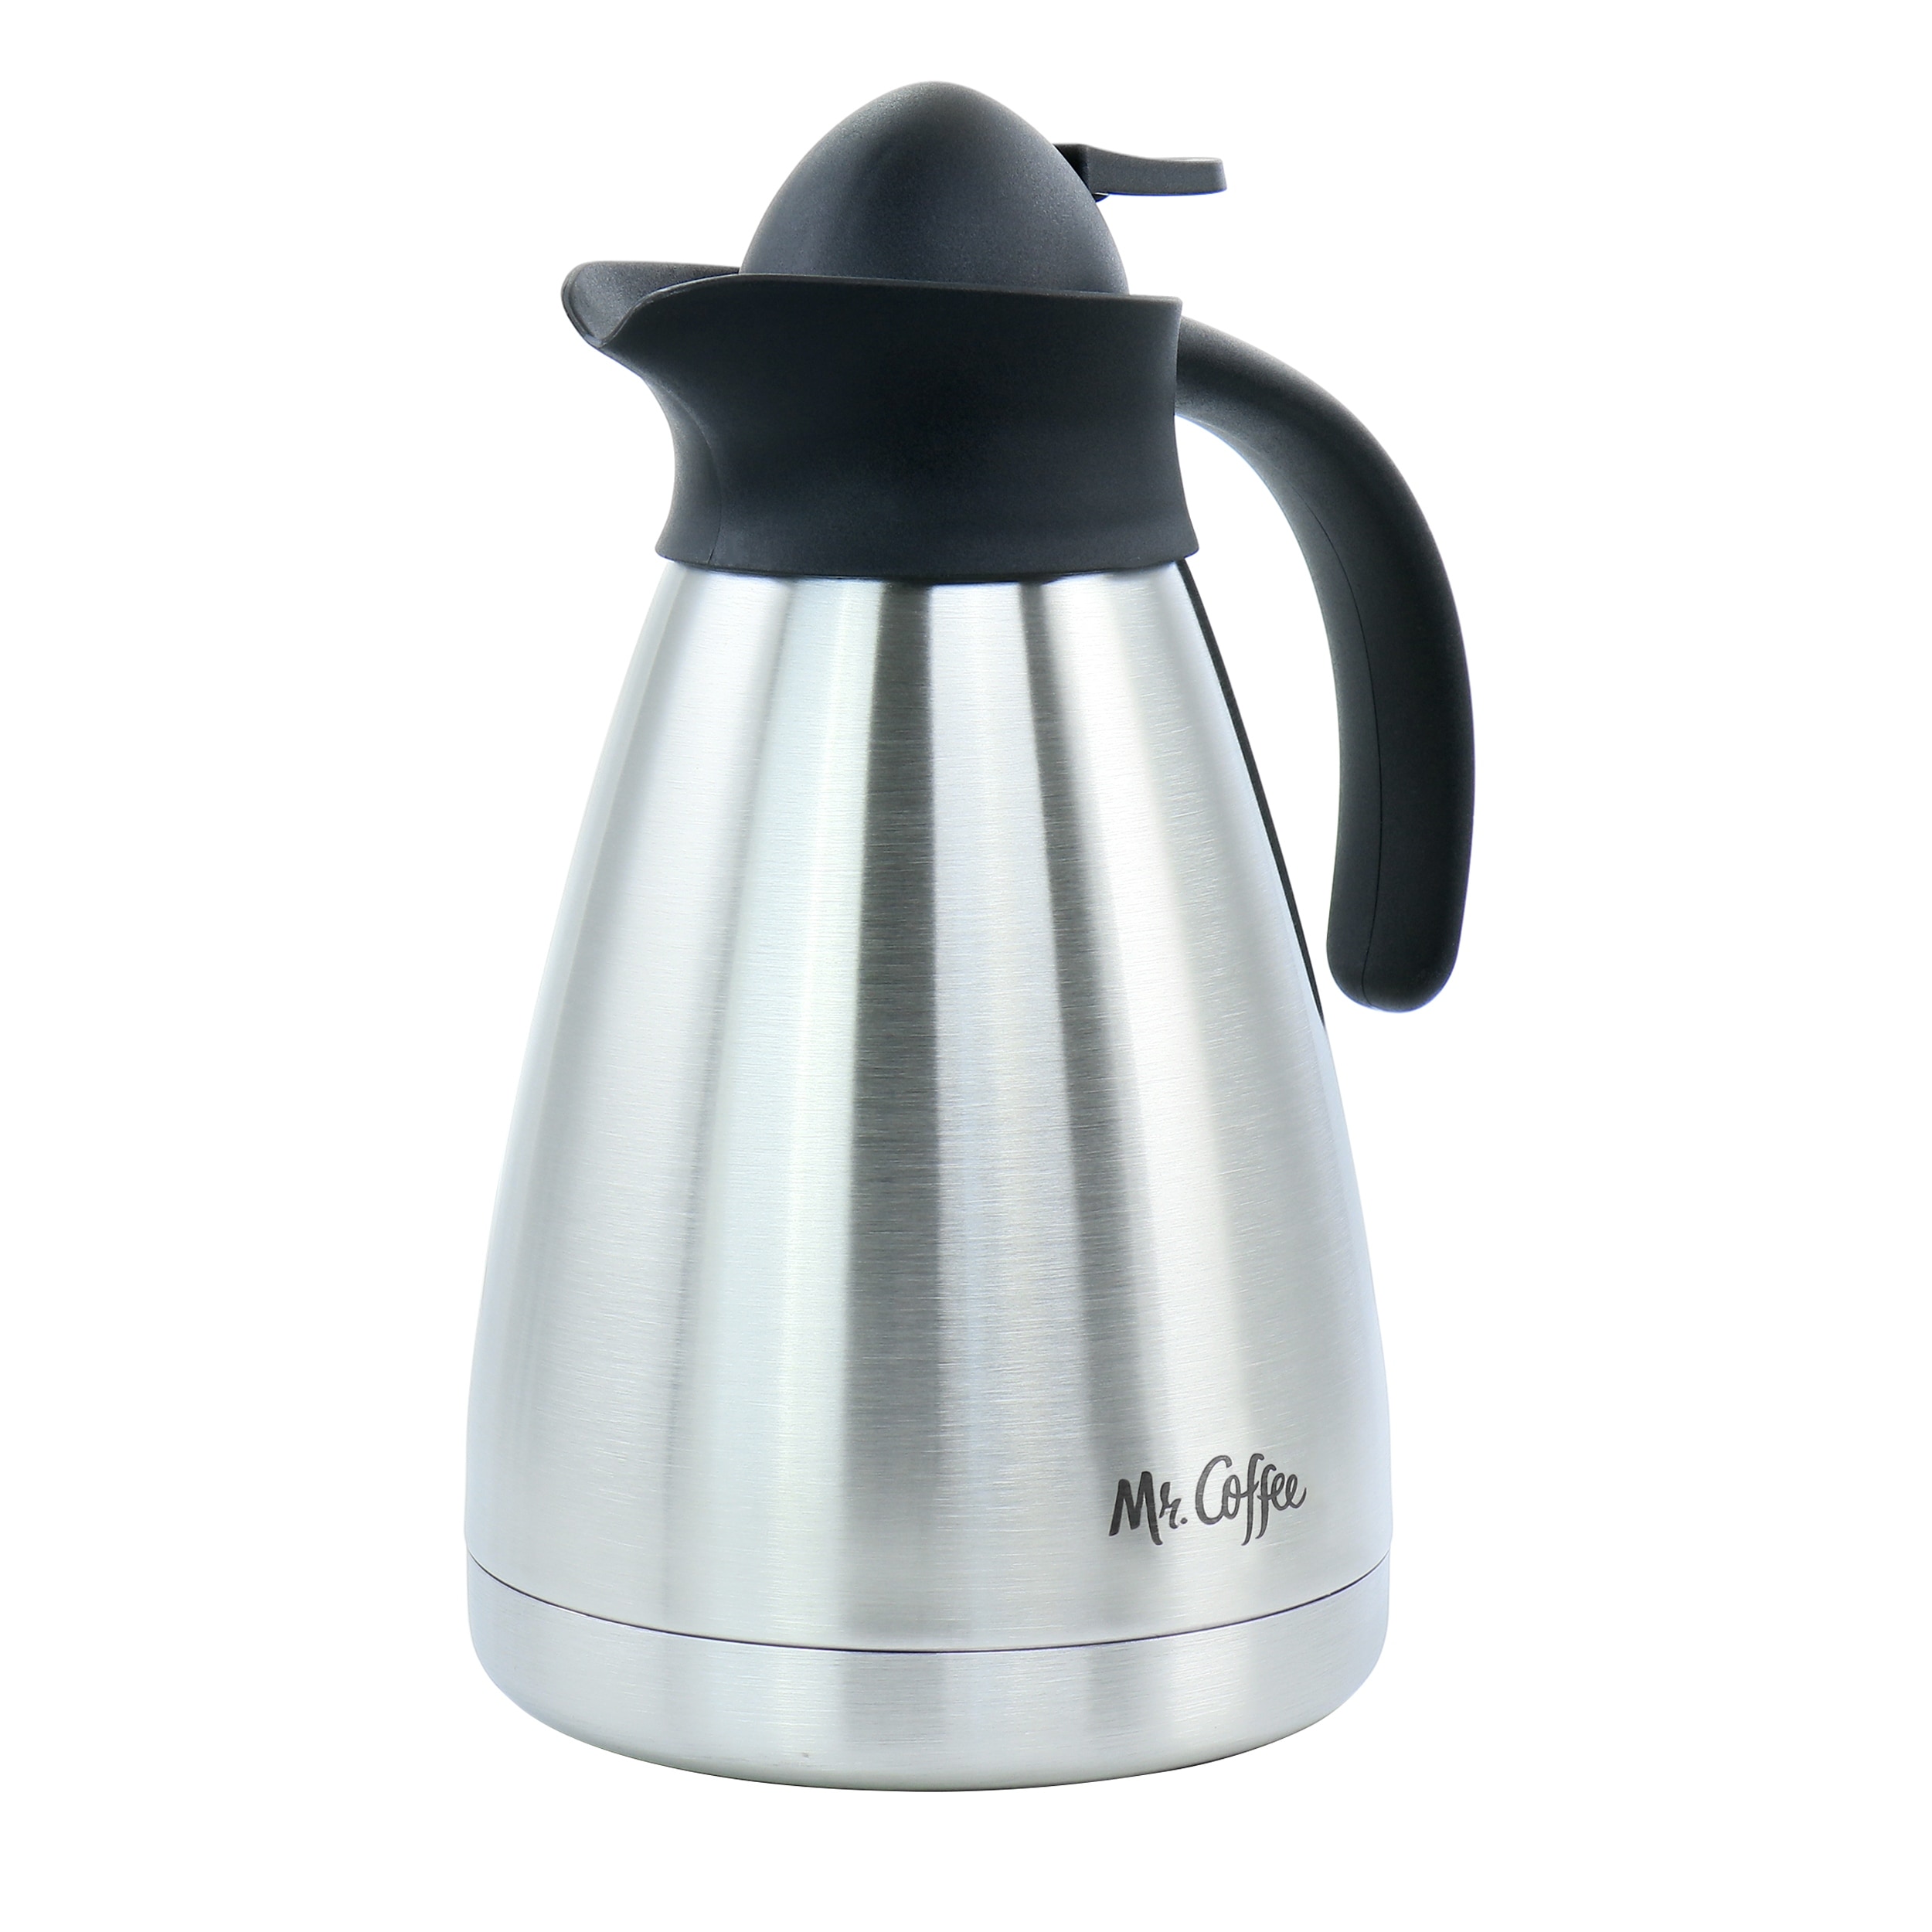 Thermal Coffee Carafe - Large Stainless Steel Insulated Carafe - 1